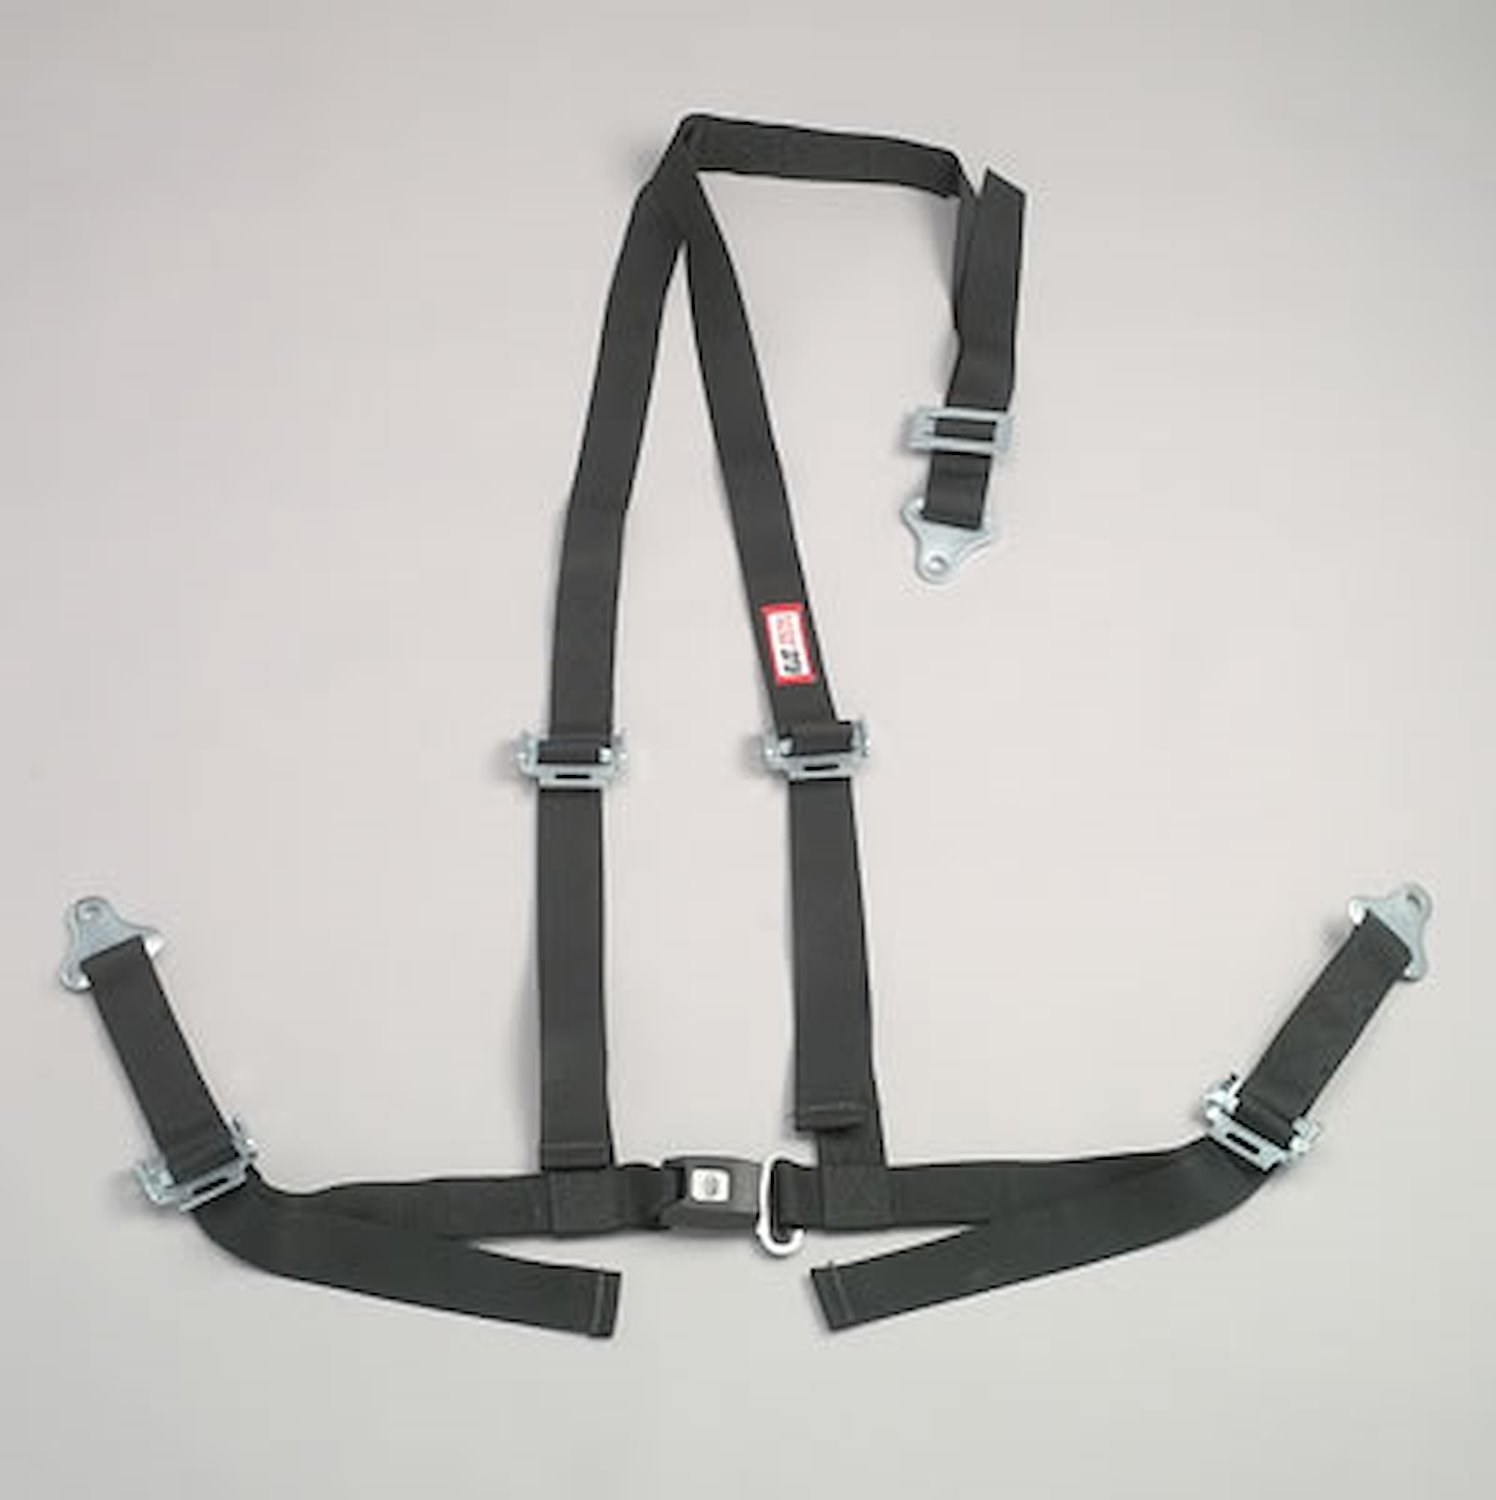 NON-SFI B&T HARNESS 2 PULL UP Lap Belt SNAP 2 S. H. Individual ROLL BAR Mount WRAP/SNAP YELLOW